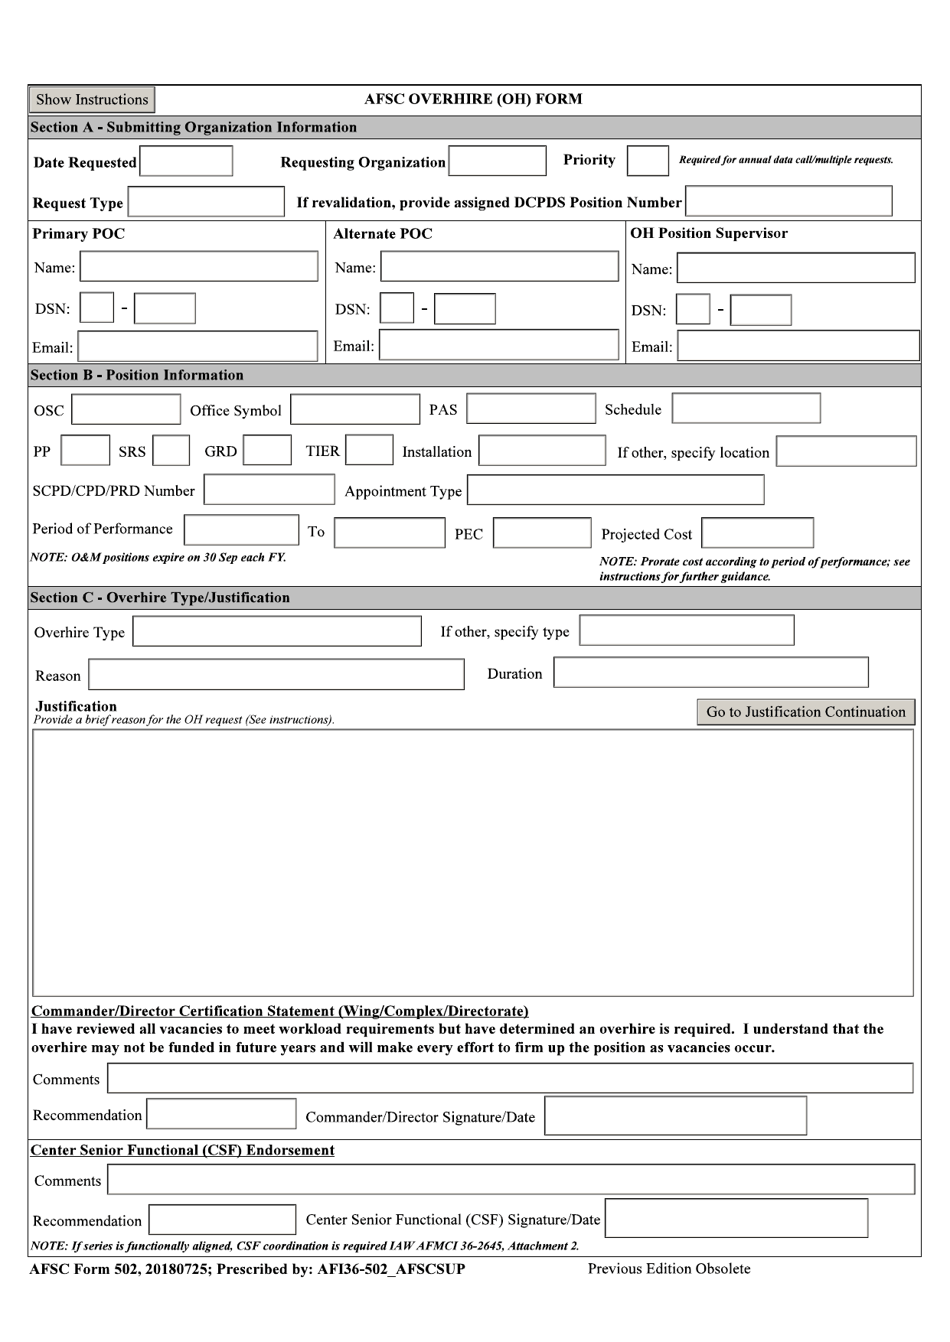 AFSC Form 502 AFSC Overhire (Oh) Form, Page 1